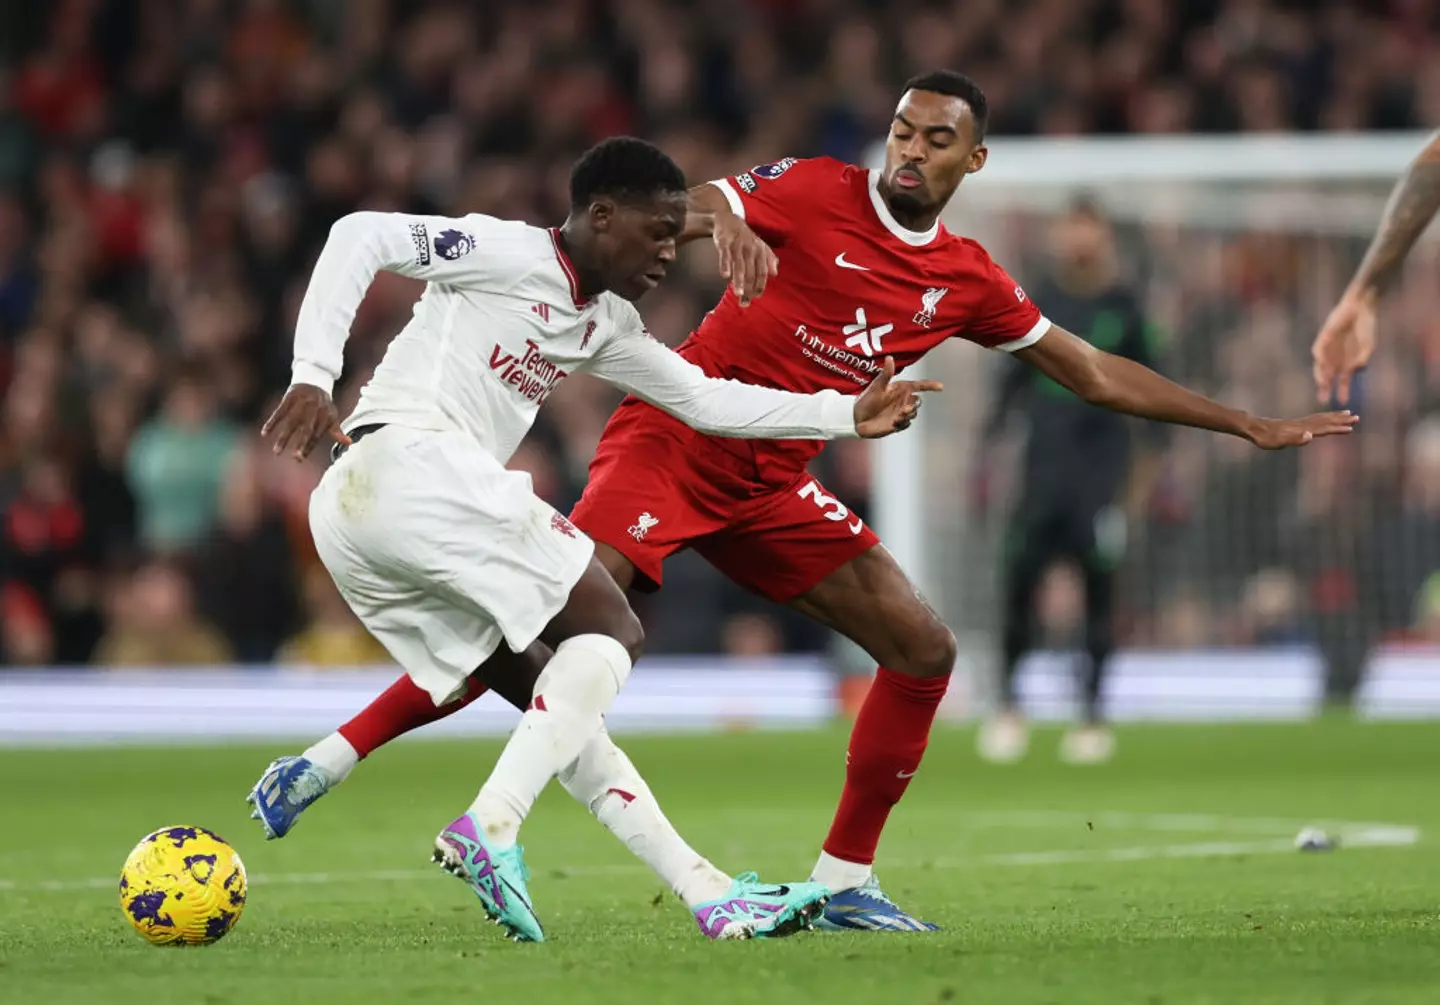 Liverpool and United drew 0-0 earlier this season (Image: Getty)